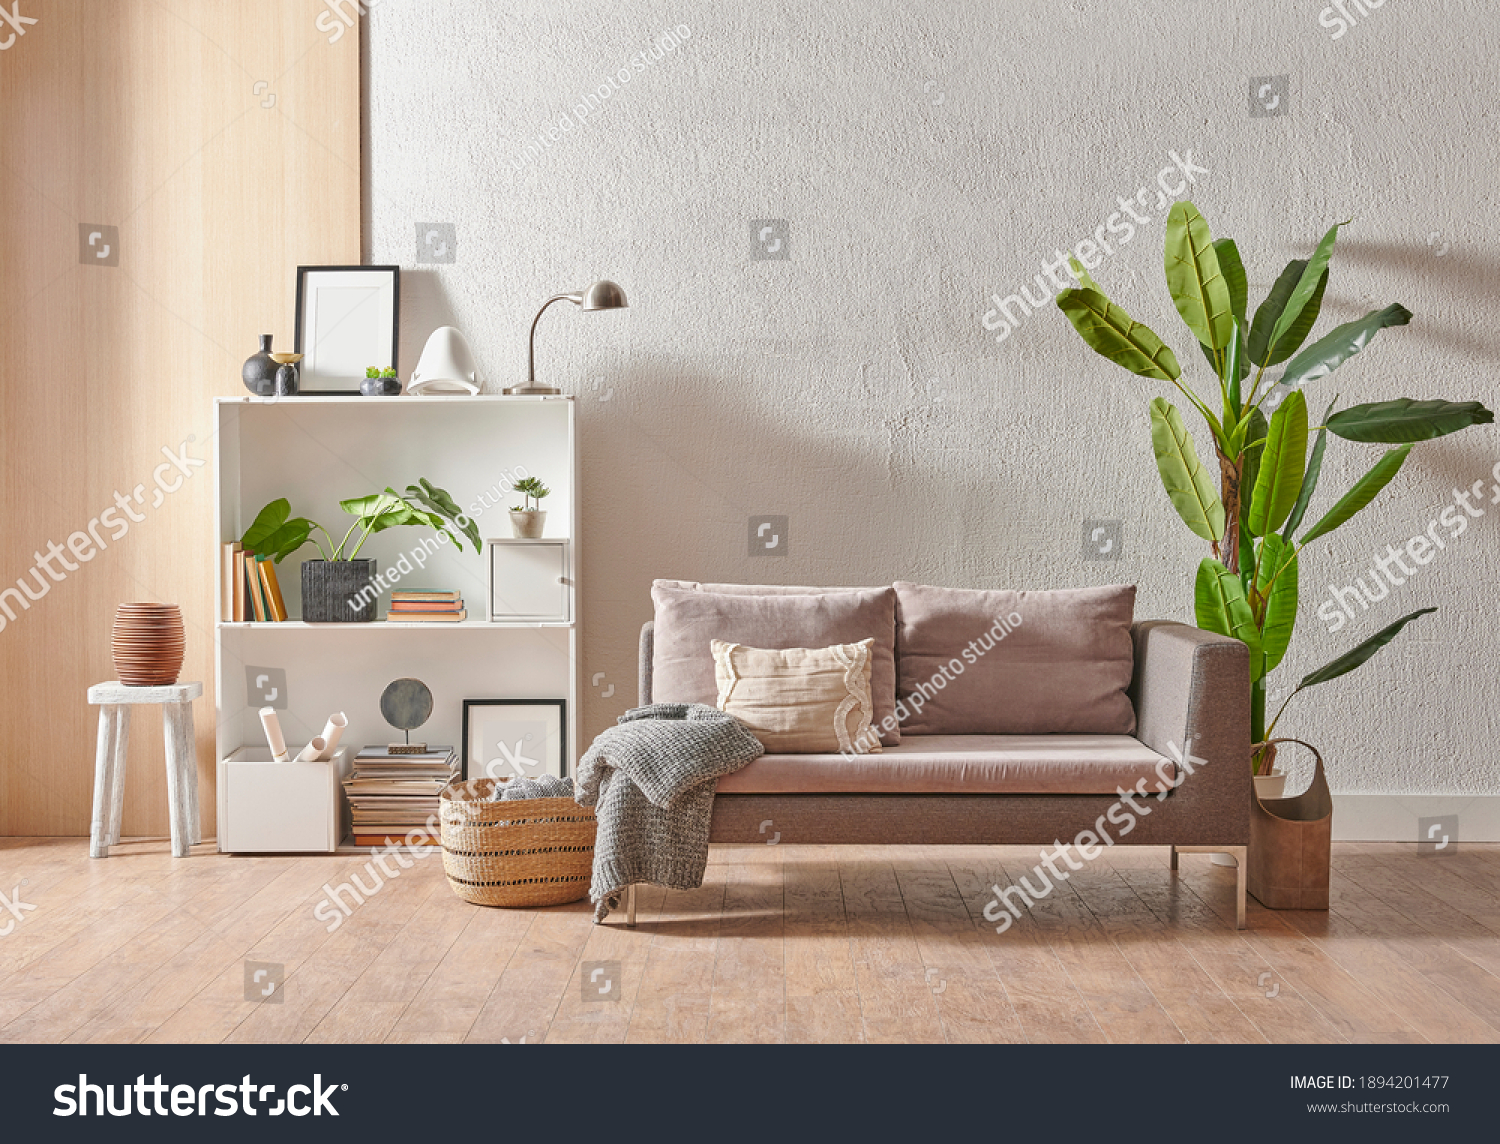 Grey stone wall interior room with wooden decor, bookshelf, sofa and vase of plant, middle table, carpet, home decoration. #1894201477